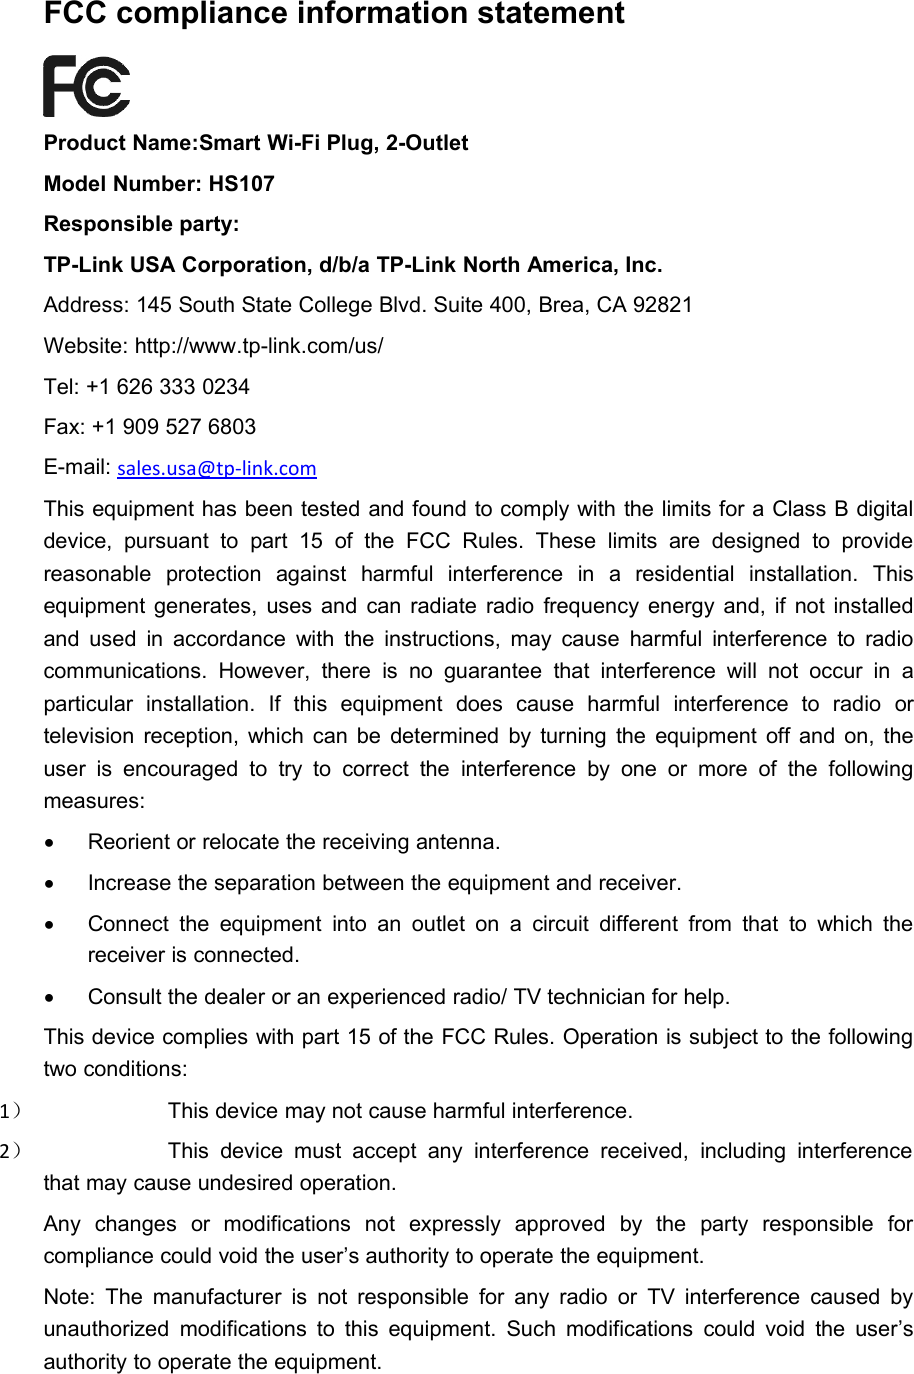 FCC compliance information statementProduct Name:Smart Wi-Fi Plug, 2-OutletModel Number: HS107Responsible party:TP-Link USA Corporation, d/b/a TP-Link North America, Inc.Address: 145 South State College Blvd. Suite 400, Brea, CA 92821Website: http://www.tp-link.com/us/Tel: +1 626 333 0234Fax: +1 909 527 6803E-mail: sales.usa@tp-link.comThis equipment has been tested and found to comply with the limits for a Class B digitaldevice, pursuant to part 15 of the FCC Rules. These limits are designed to providereasonable protection against harmful interference in a residential installation. Thisequipment generates, uses and can radiate radio frequency energy and, if not installedand used in accordance with the instructions, may cause harmful interference to radiocommunications. However, there is no guarantee that interference will not occur in aparticular installation. If this equipment does cause harmful interference to radio ortelevision reception, which can be determined by turning the equipment off and on, theuser is encouraged to try to correct the interference by one or more of the followingmeasures:Reorient or relocate the receiving antenna.Increase the separation between the equipment and receiver.Connect the equipment into an outlet on a circuit different from that to which thereceiver is connected.Consult the dealer or an experienced radio/ TV technician for help.This device complies with part 15 of the FCC Rules. Operation is subject to the followingtwo conditions:1）This device may not cause harmful interference.2）This device must accept any interference received, including interferencethat may cause undesired operation.Any changes or modifications not expressly approved by the party responsible forcompliance could void the user’s authority to operate the equipment.Note: The manufacturer is not responsible for any radio or TV interference caused byunauthorized modifications to this equipment. Such modifications could void the user’sauthority to operate the equipment.